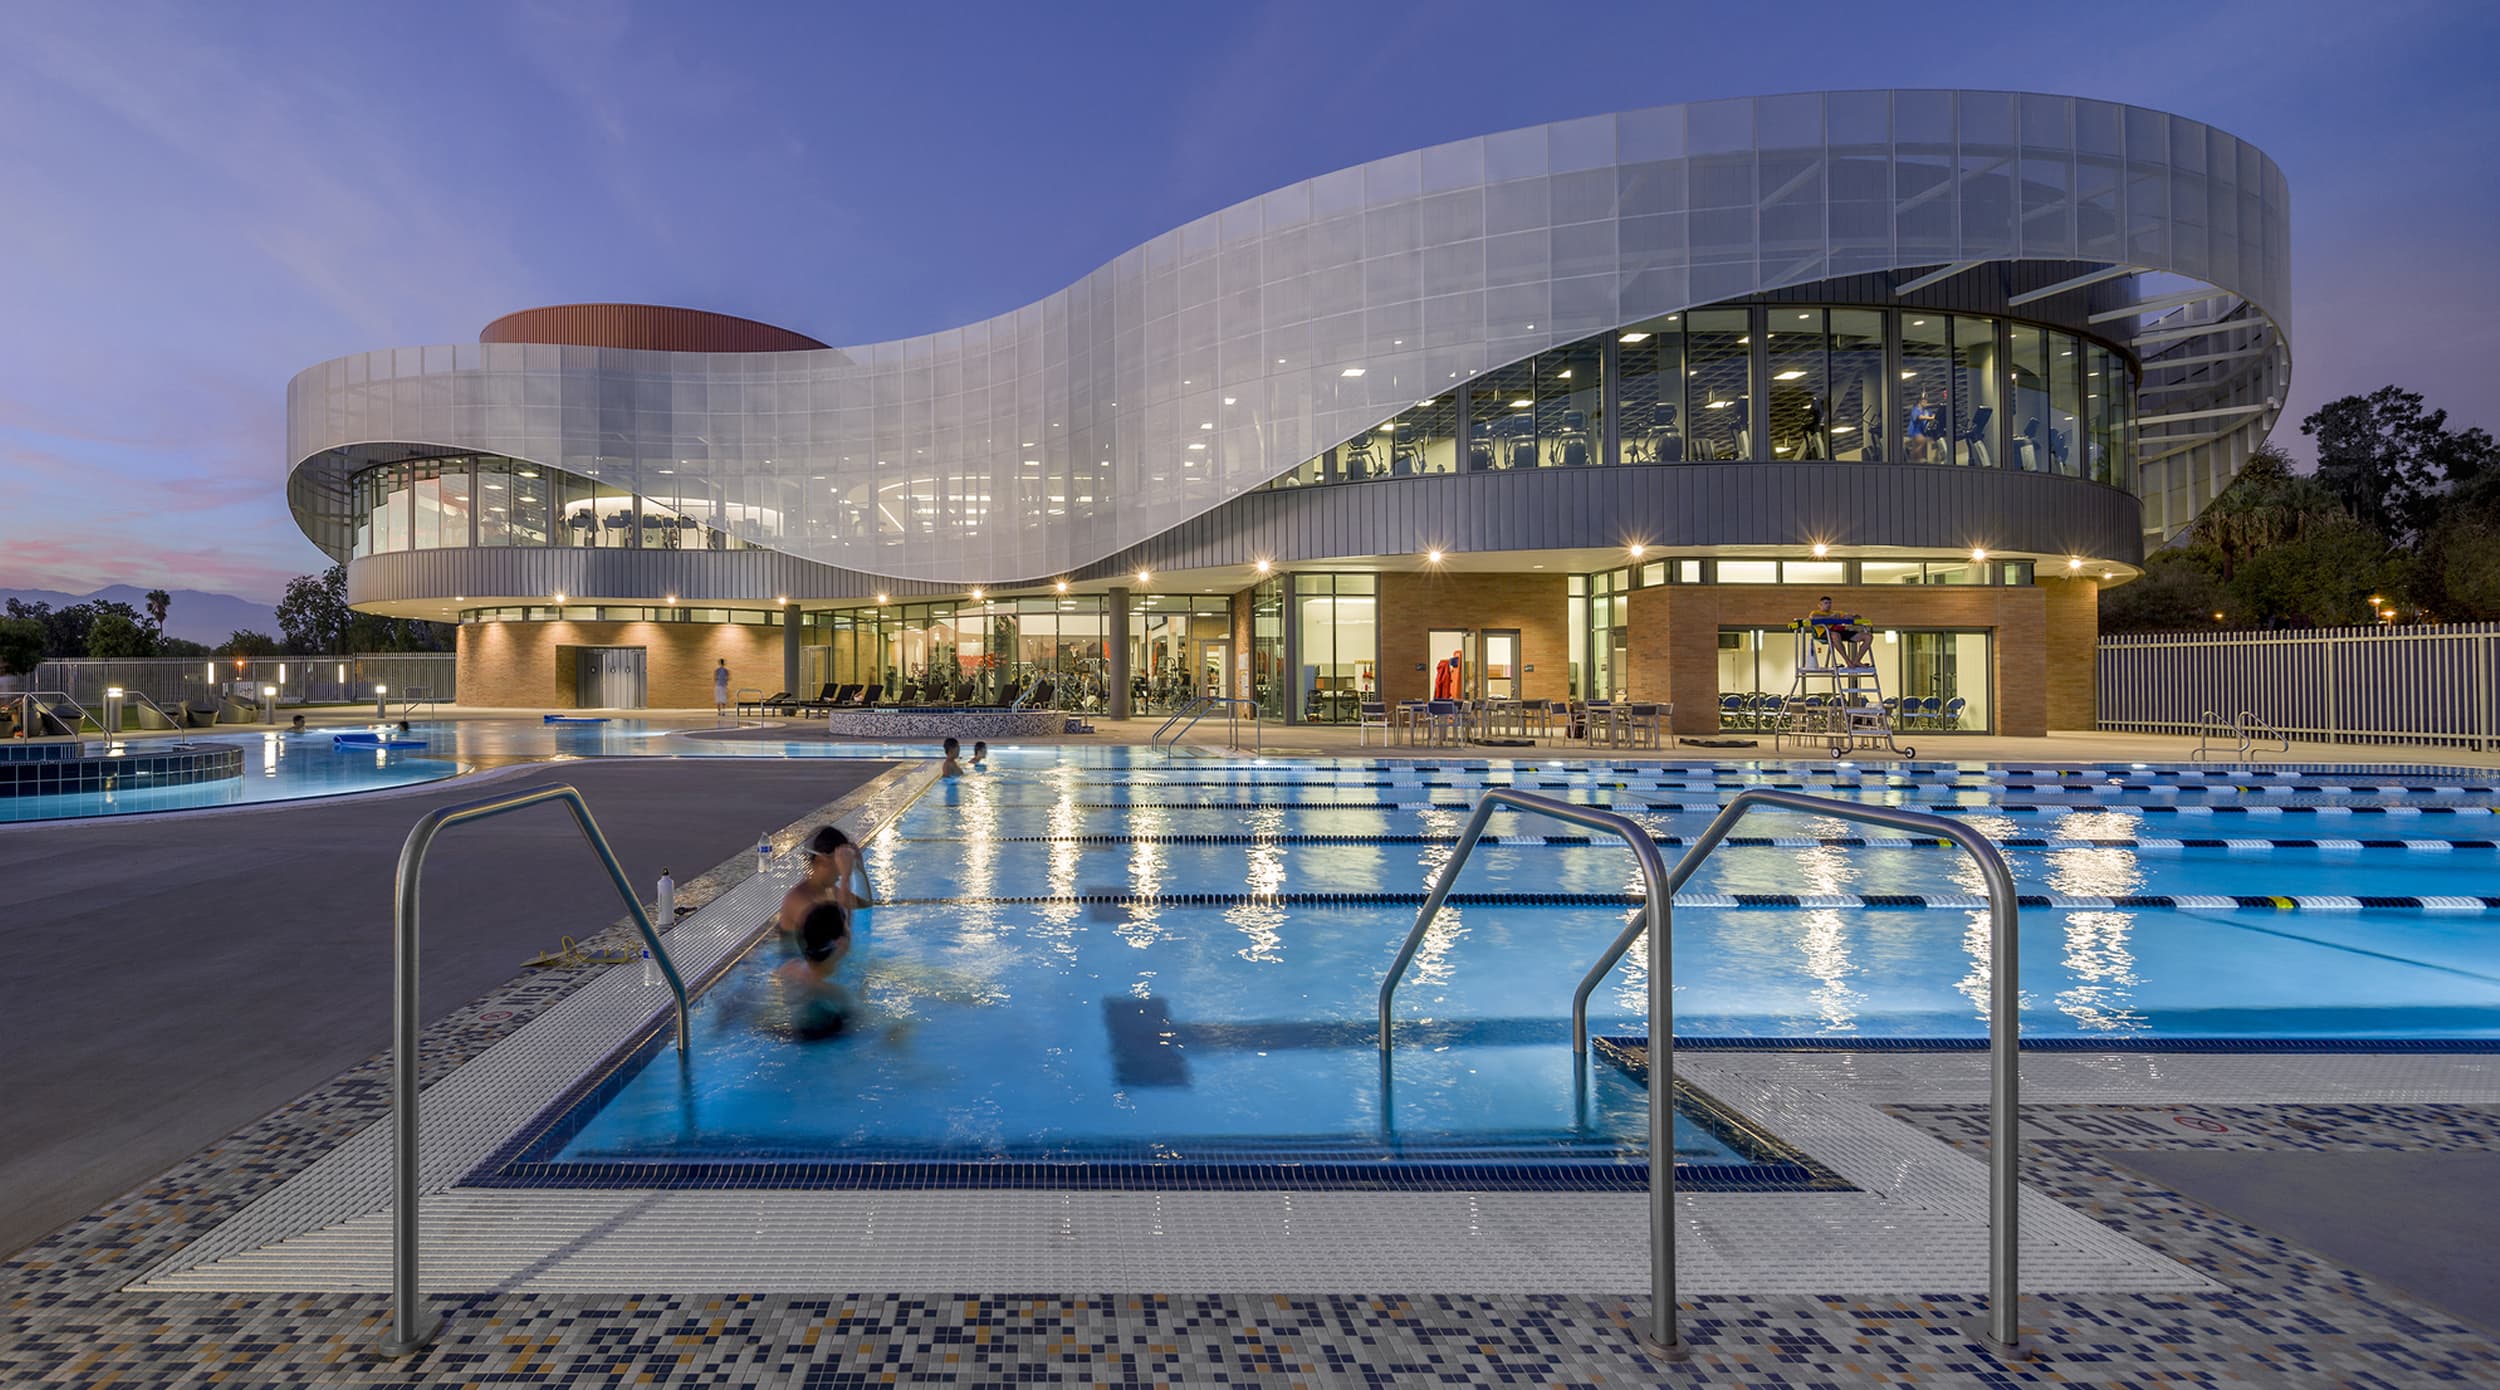 People swimming in an outdoor pool at night at a college recreation center